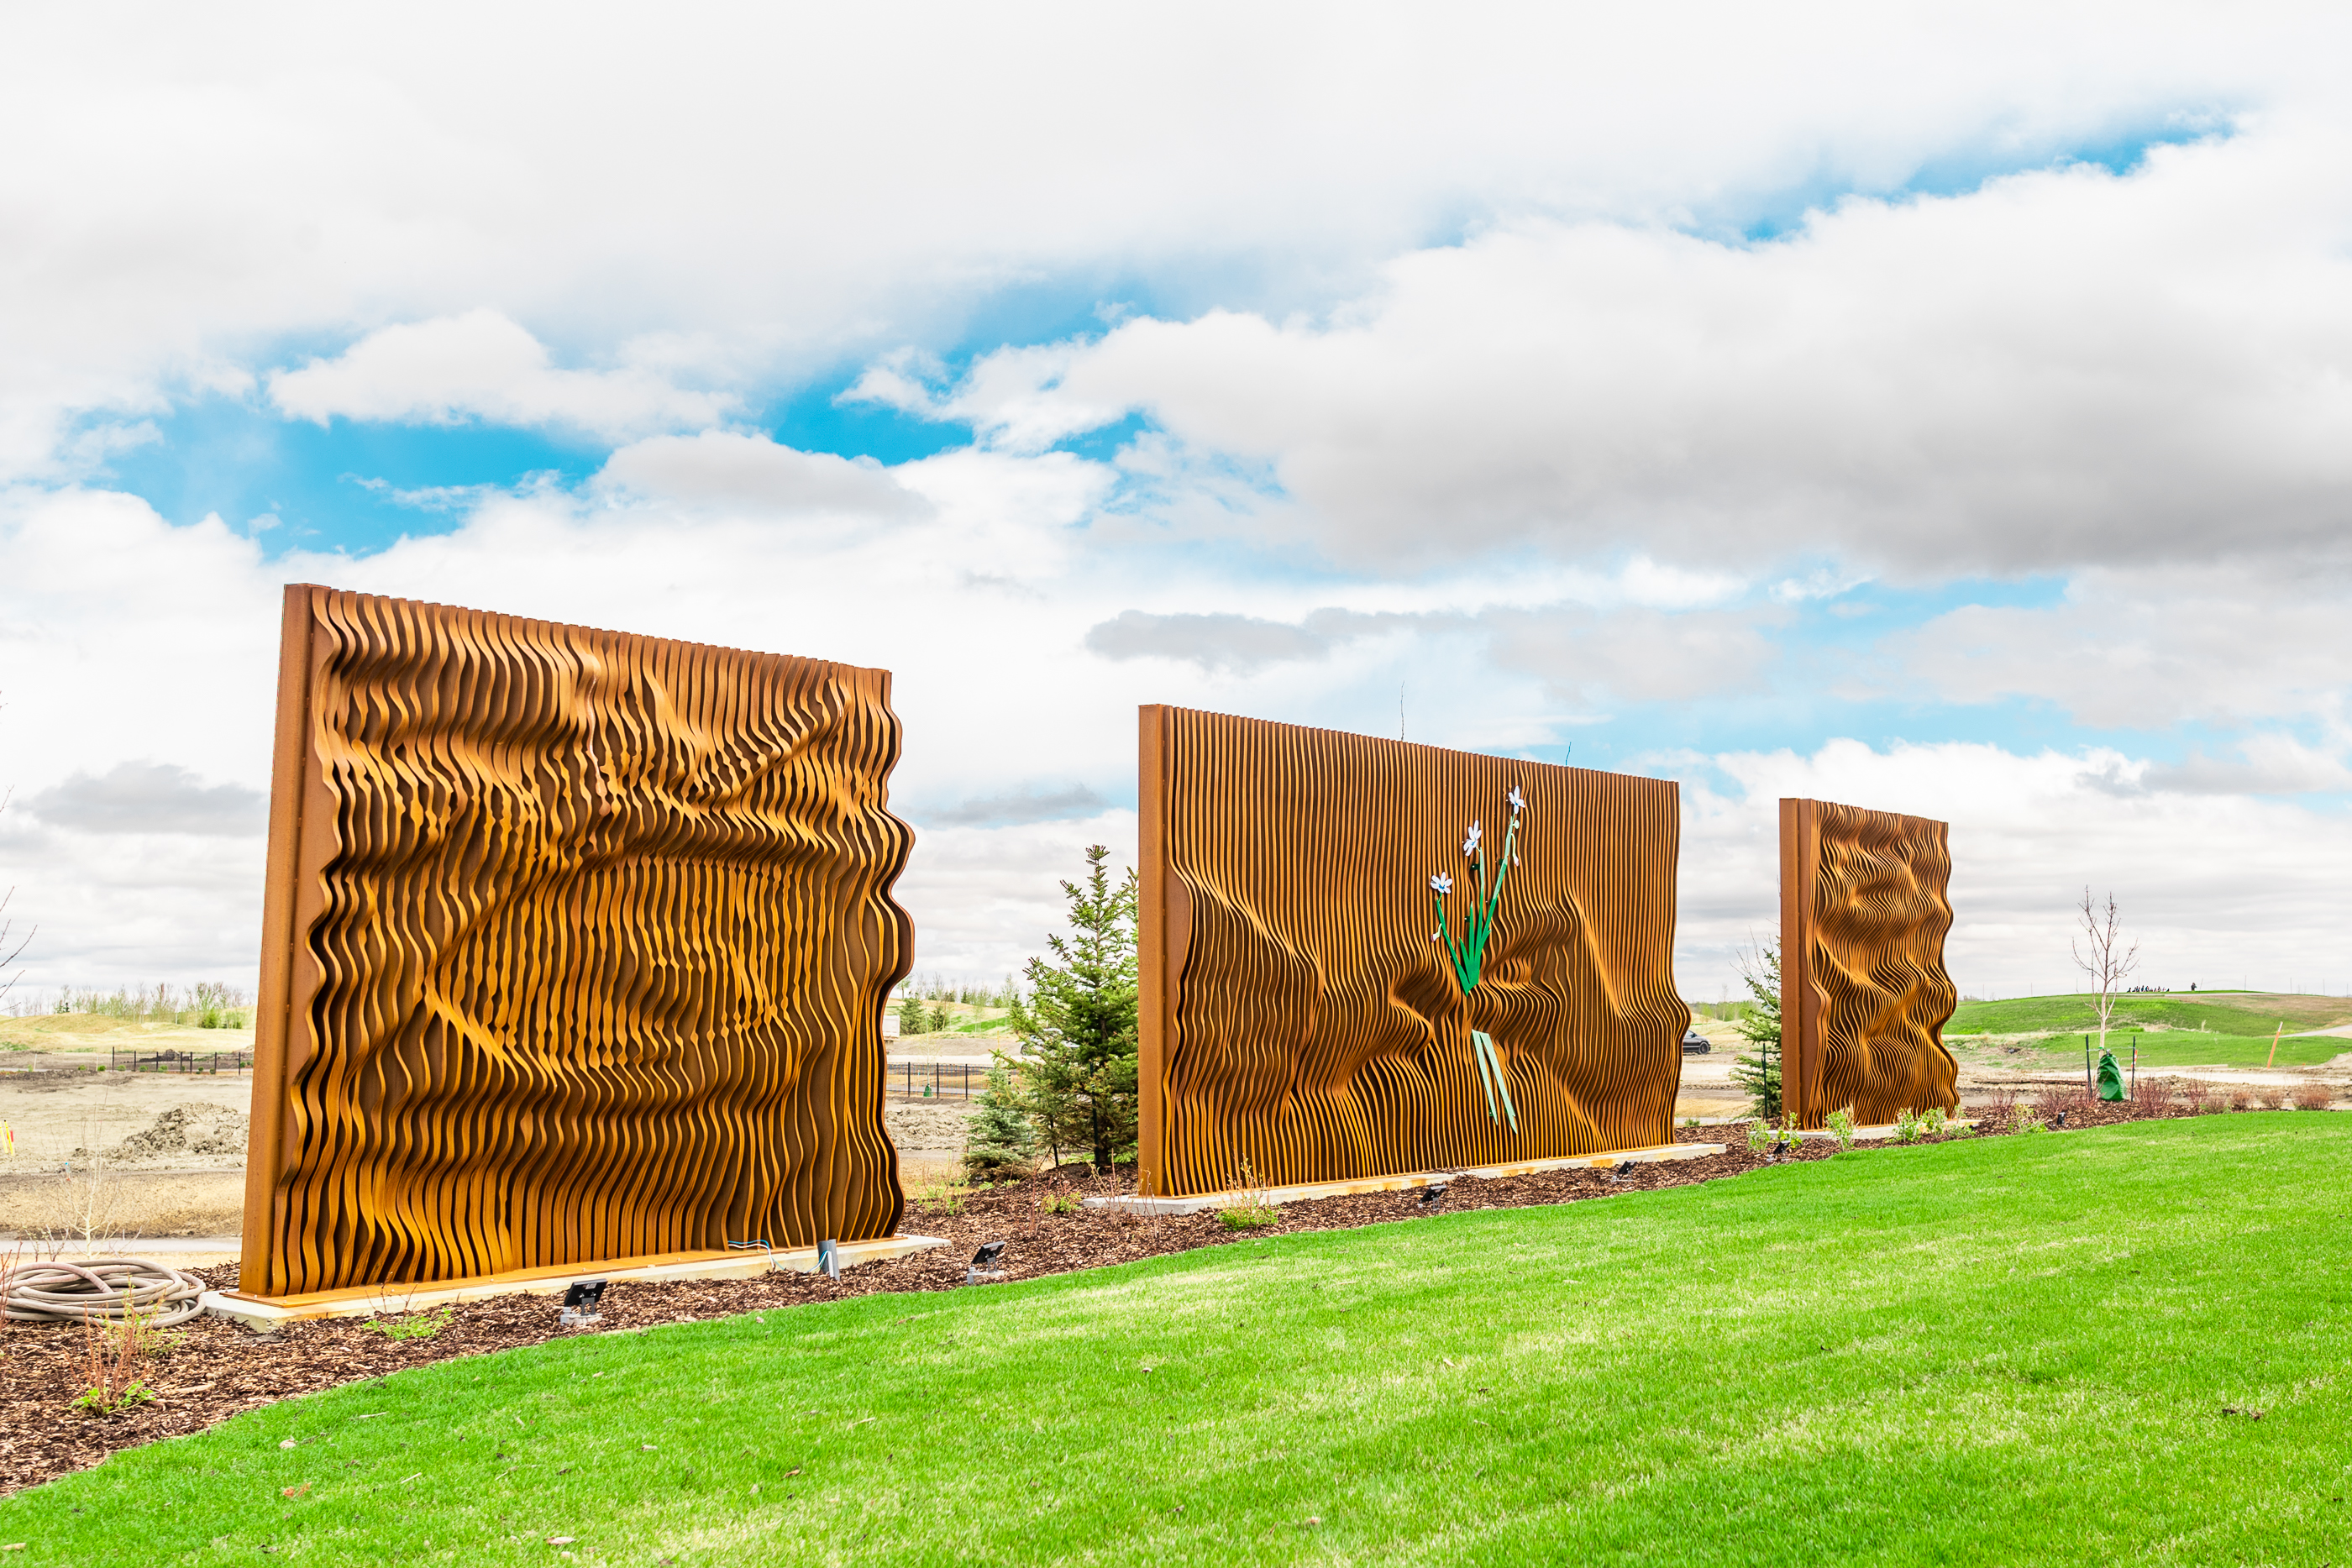 Gordon Skilling’s “[Re]newal - Profound Cycles”. In the centre of the piece, two hands are passing a rare species of grass.